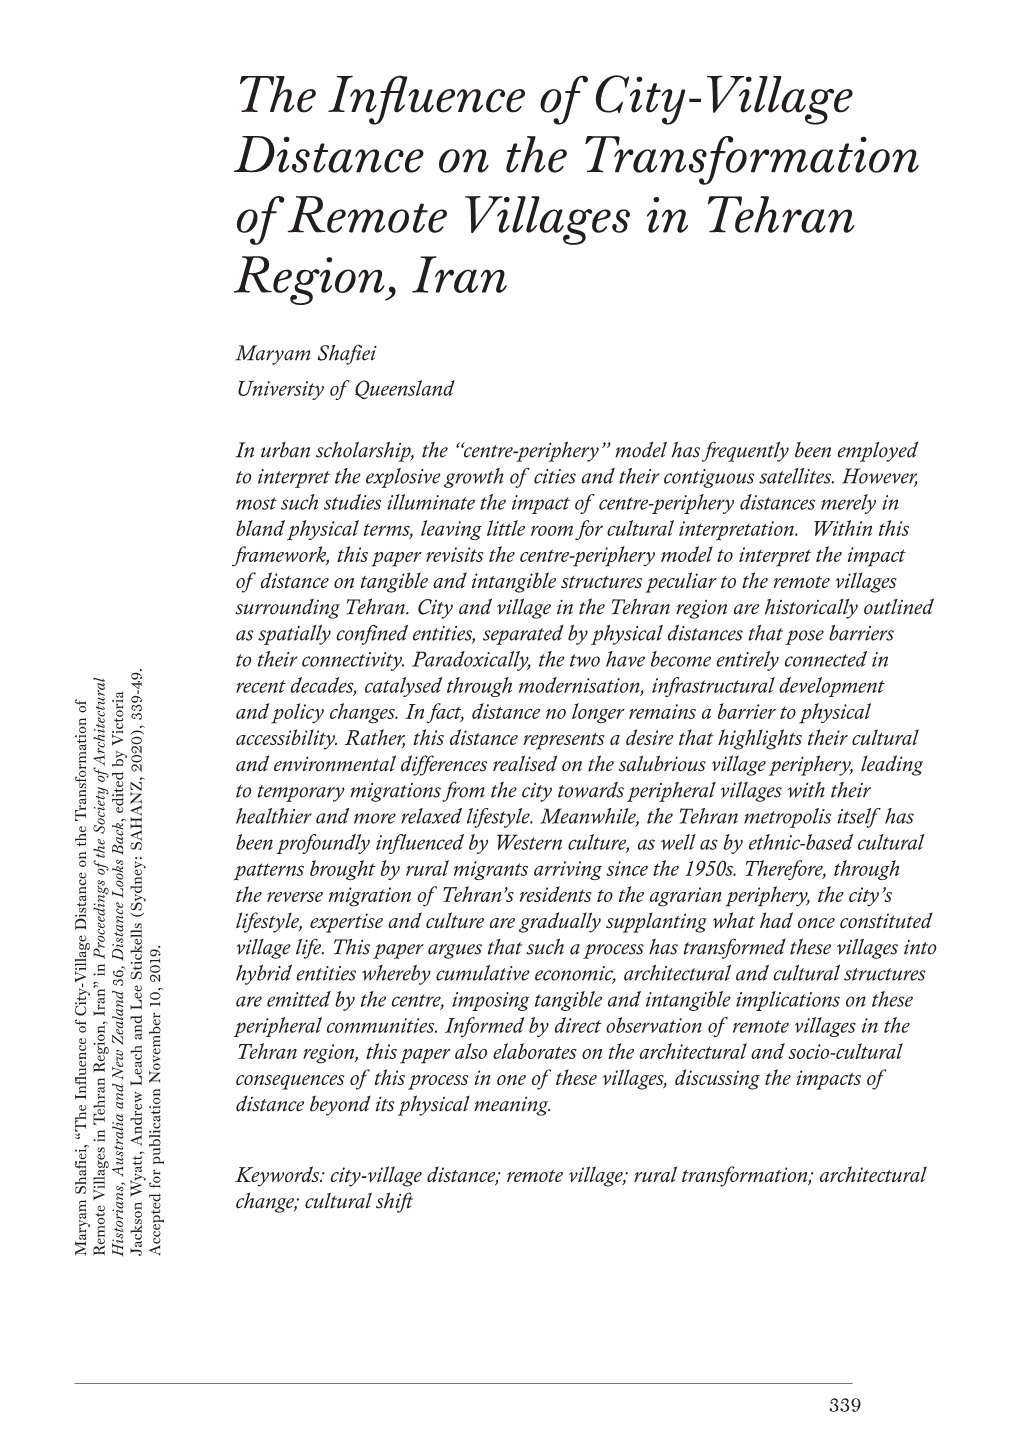 The Influence of City-Village Distance on the Transformation of Remote Villages in Tehran Region, Iran